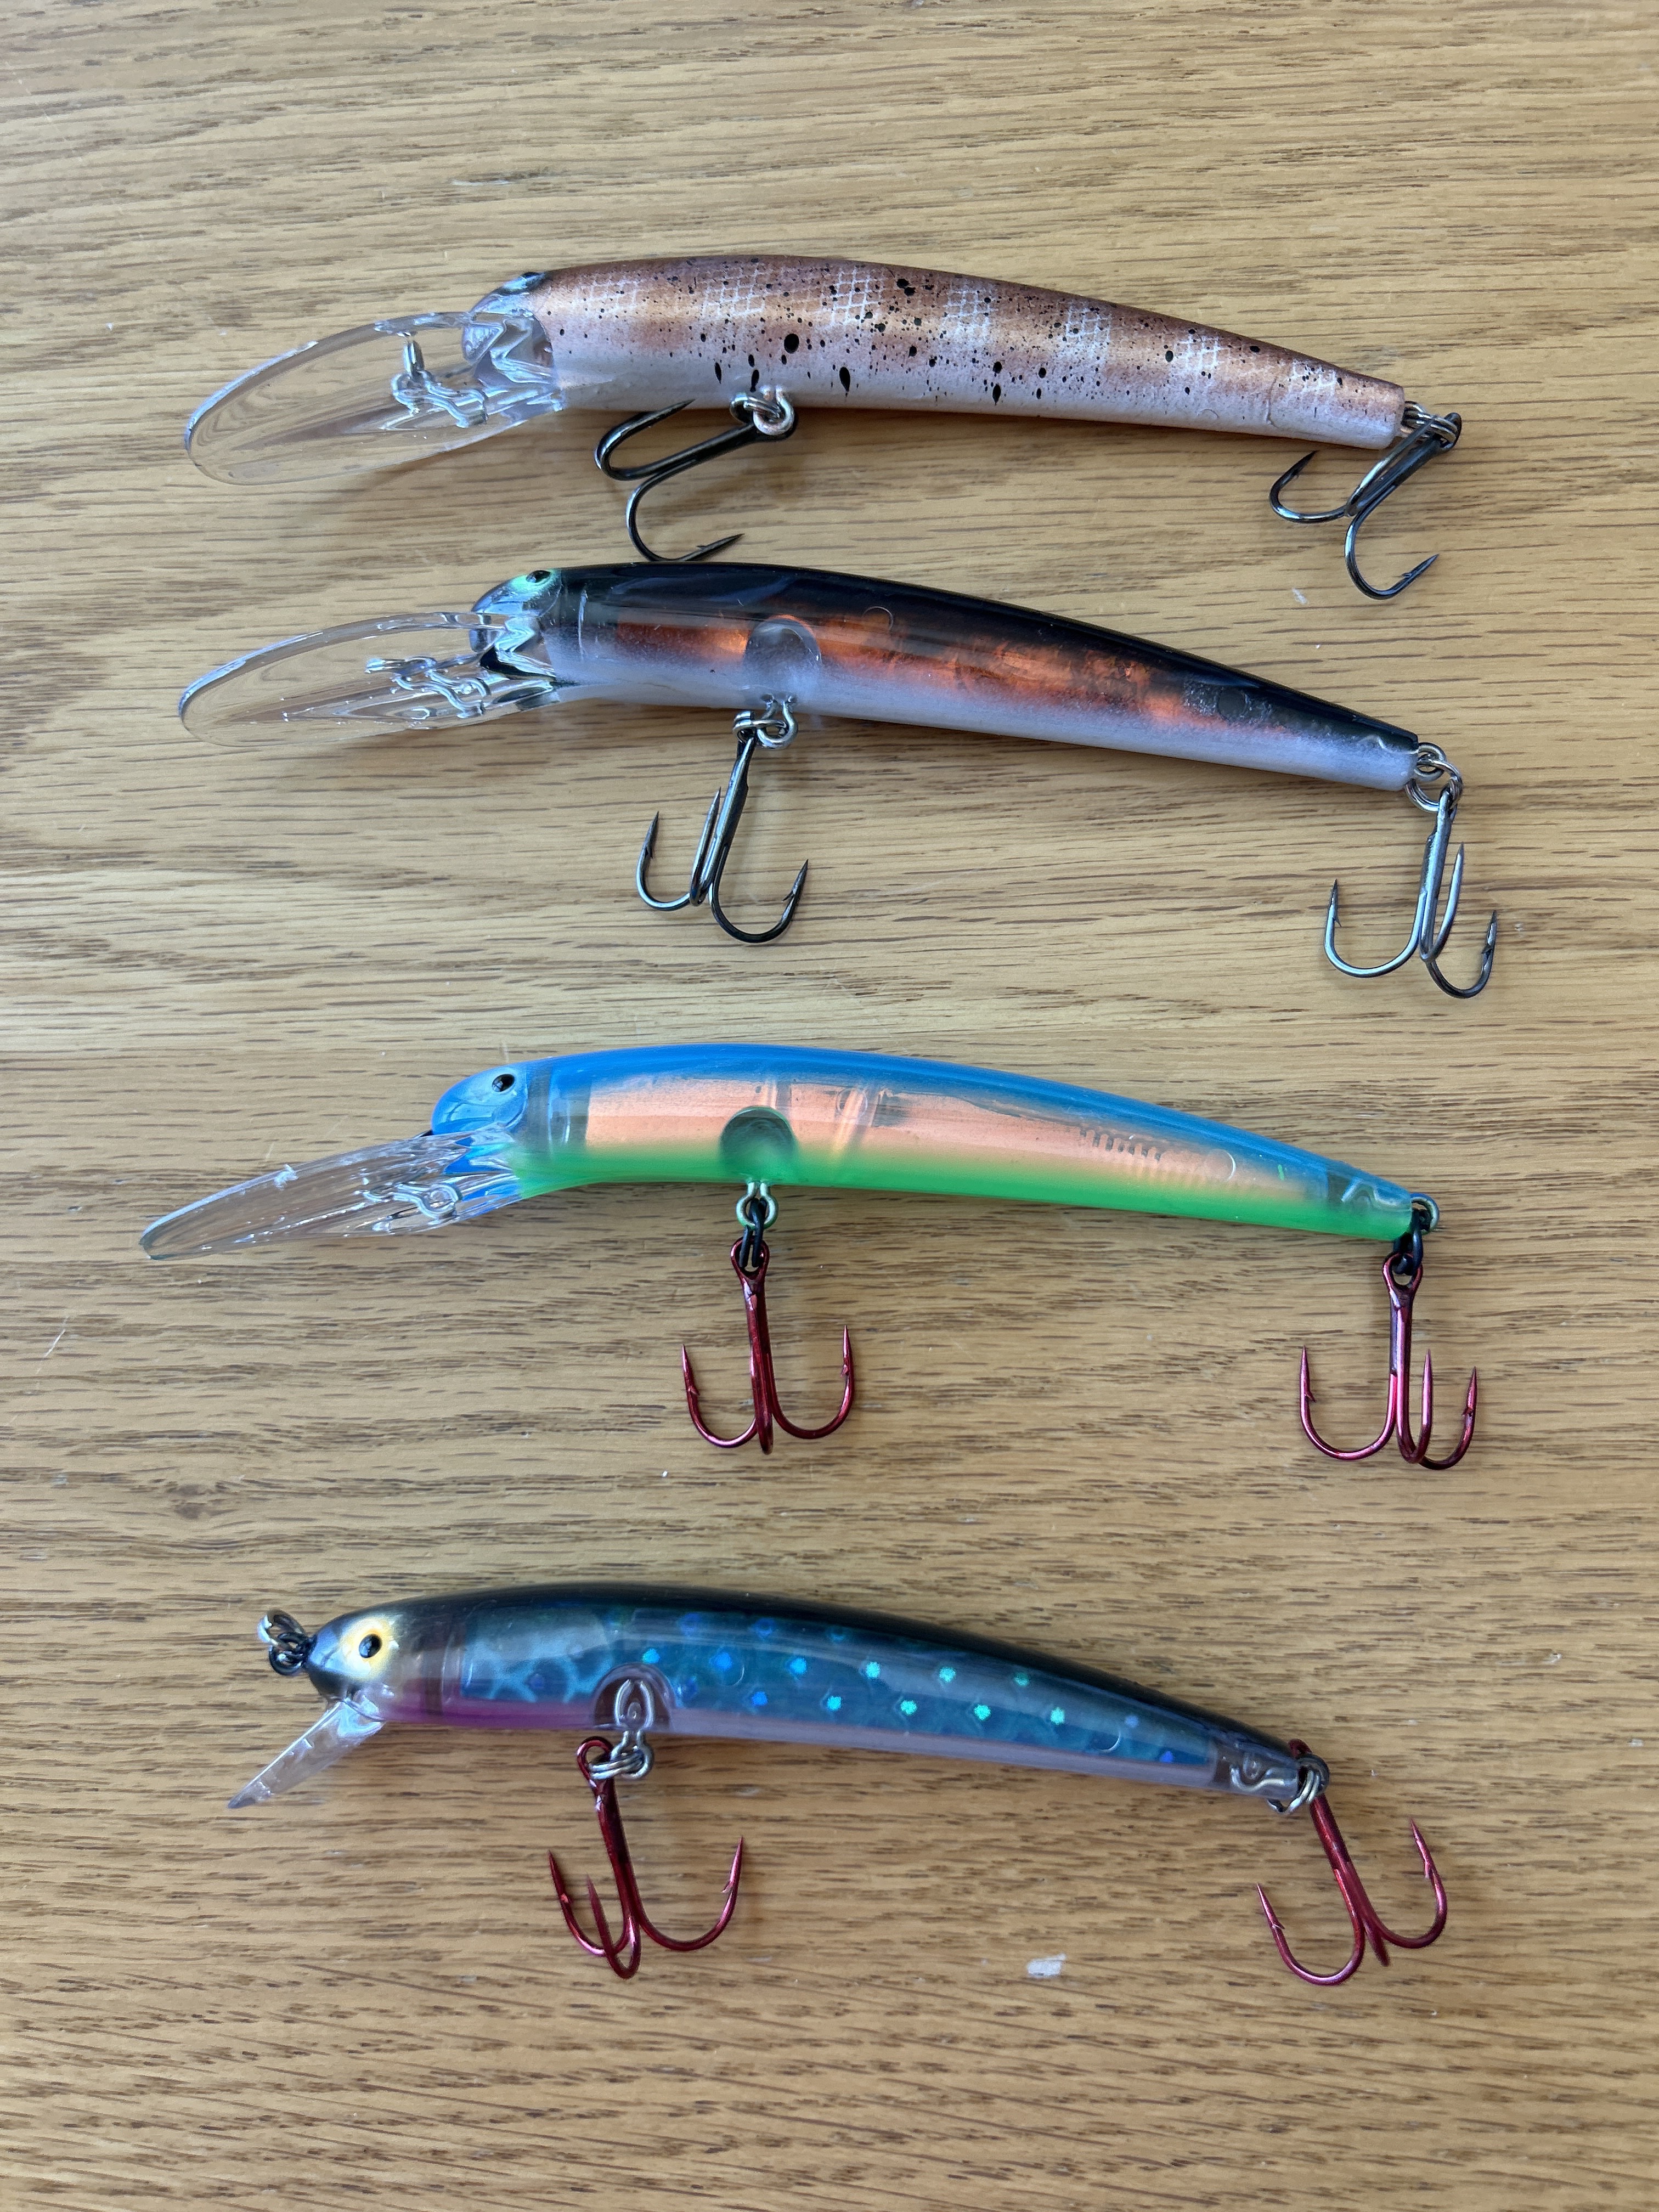 BAY RAT LURES - Classifieds - Buy, Sell, Trade or Rent - Lake Erie